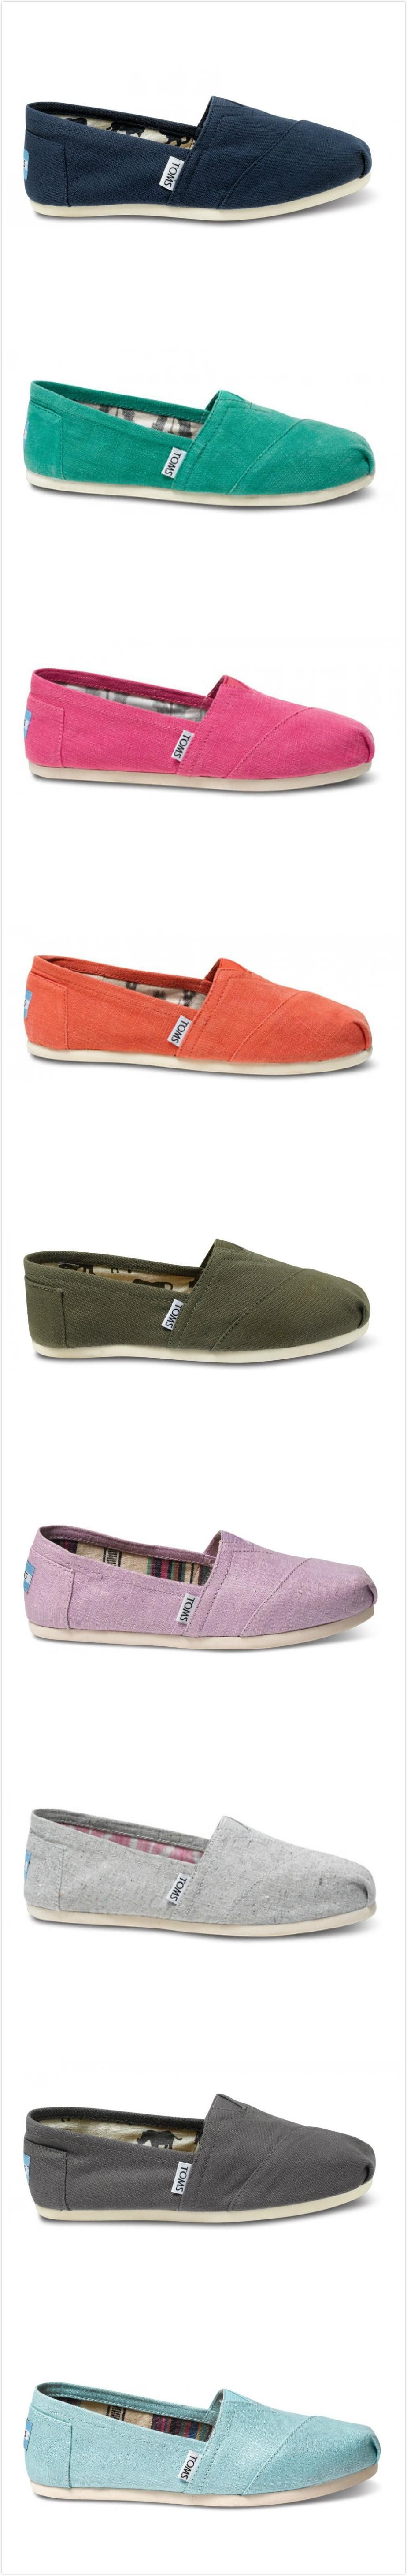 TOMS Shoes Outlet…$19.99!